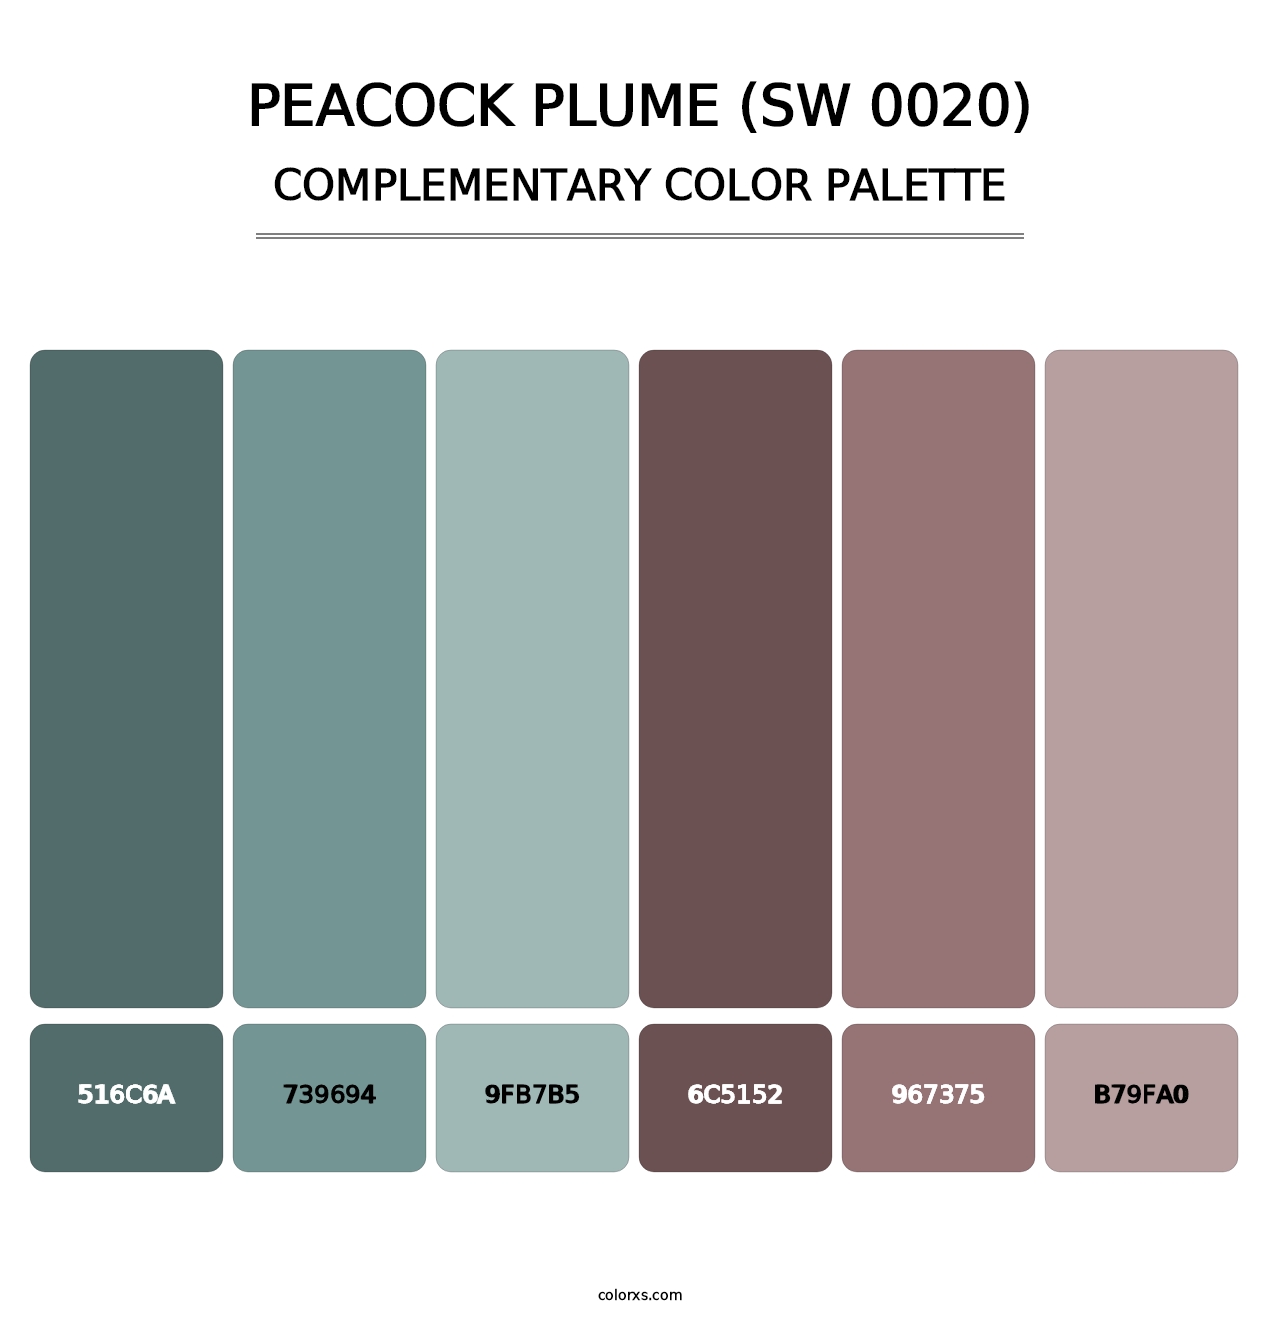 Peacock Plume (SW 0020) - Complementary Color Palette